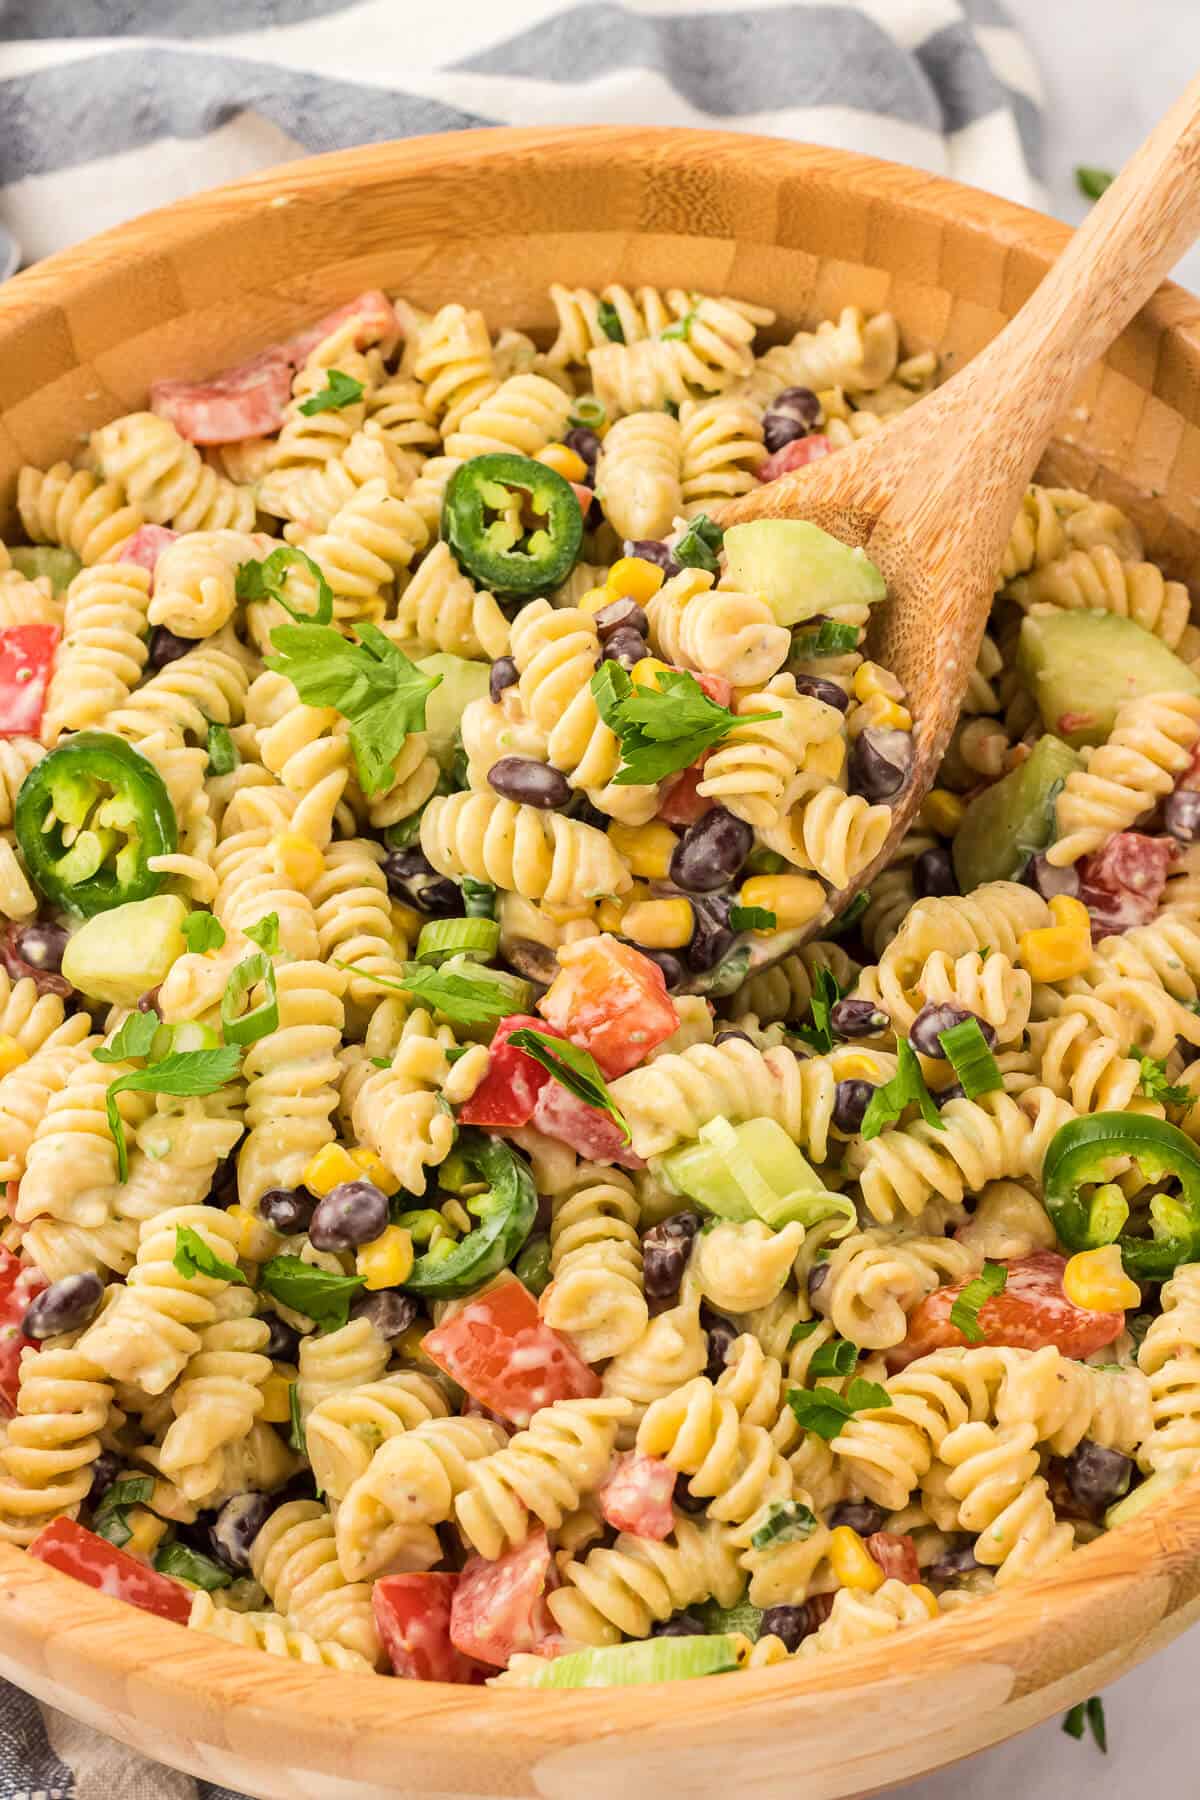 A bowl of jalapeno ranch pasta salad with a wooden spoon.